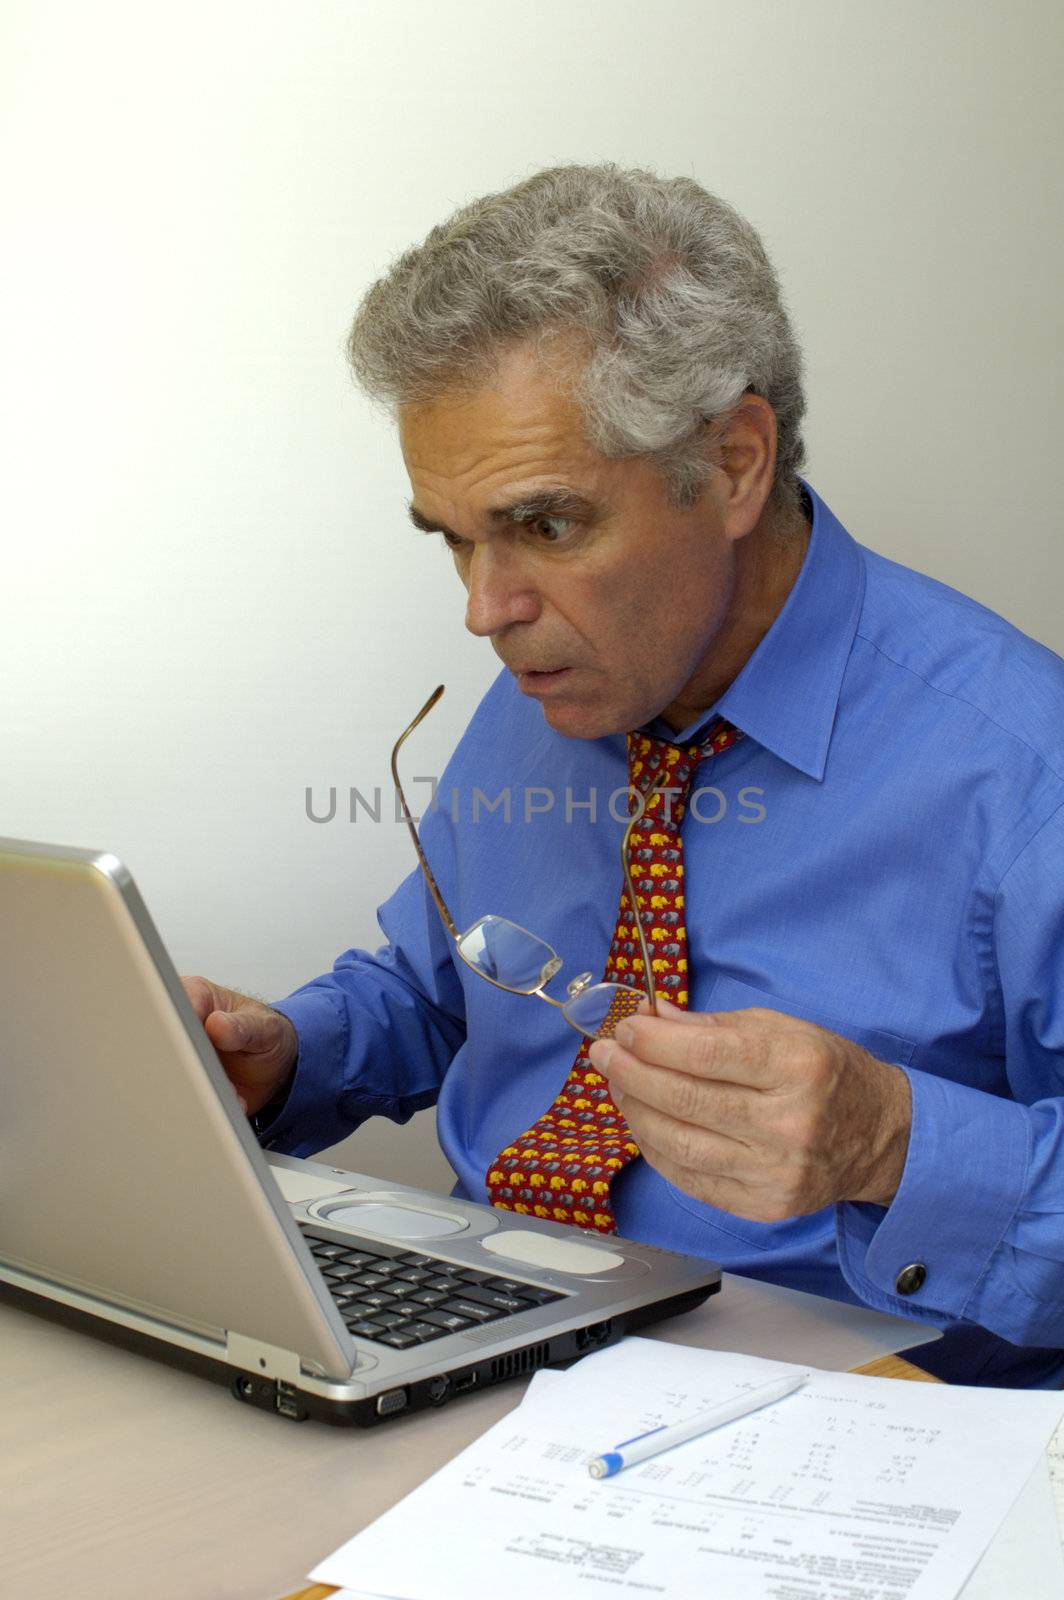 A businessman looks at his laptop computer as though it's about to explode. Something has gone seriously wrong.